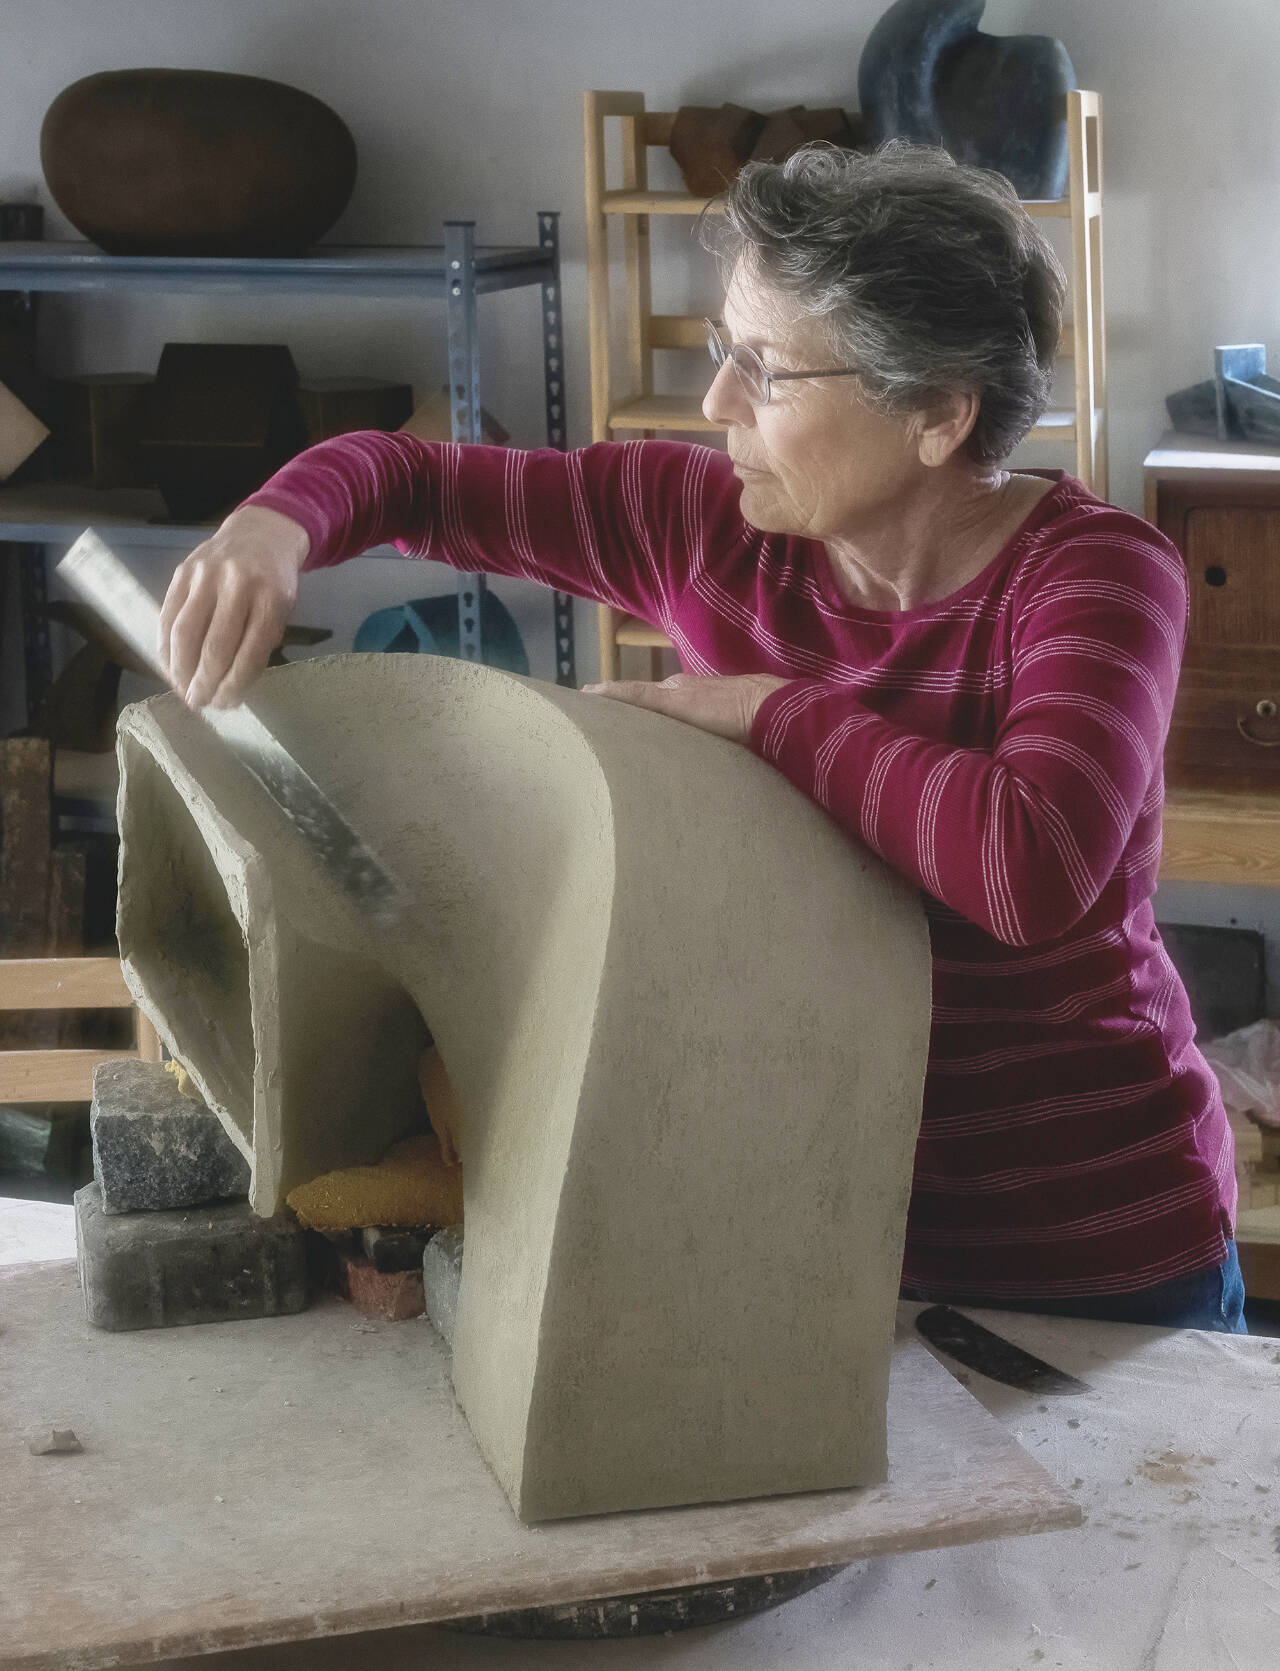 Photo courtesy of Peninsula College / Sculptor Jan Hoy (pictured) and photographer Harry von Stark see their artistry on display in a dual exhibit at Peninsula College’s PUB Gallery of Art through Jan. 26.